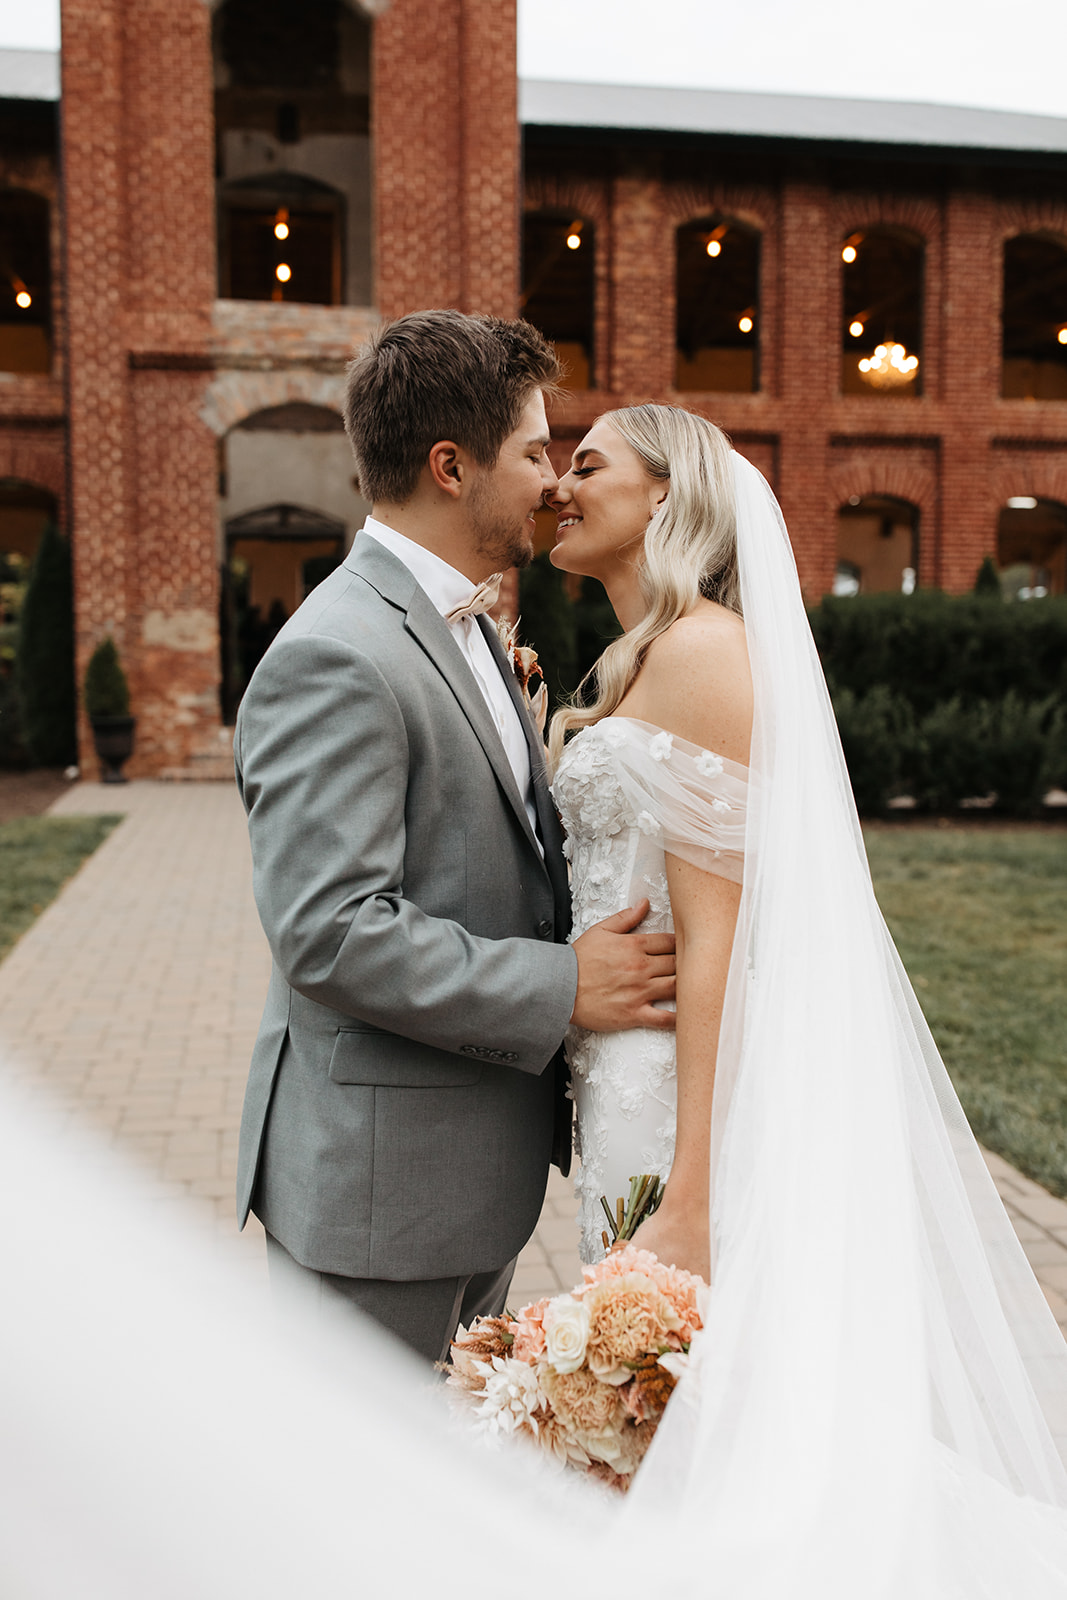 the couple kissing in front of the unique wedding venue